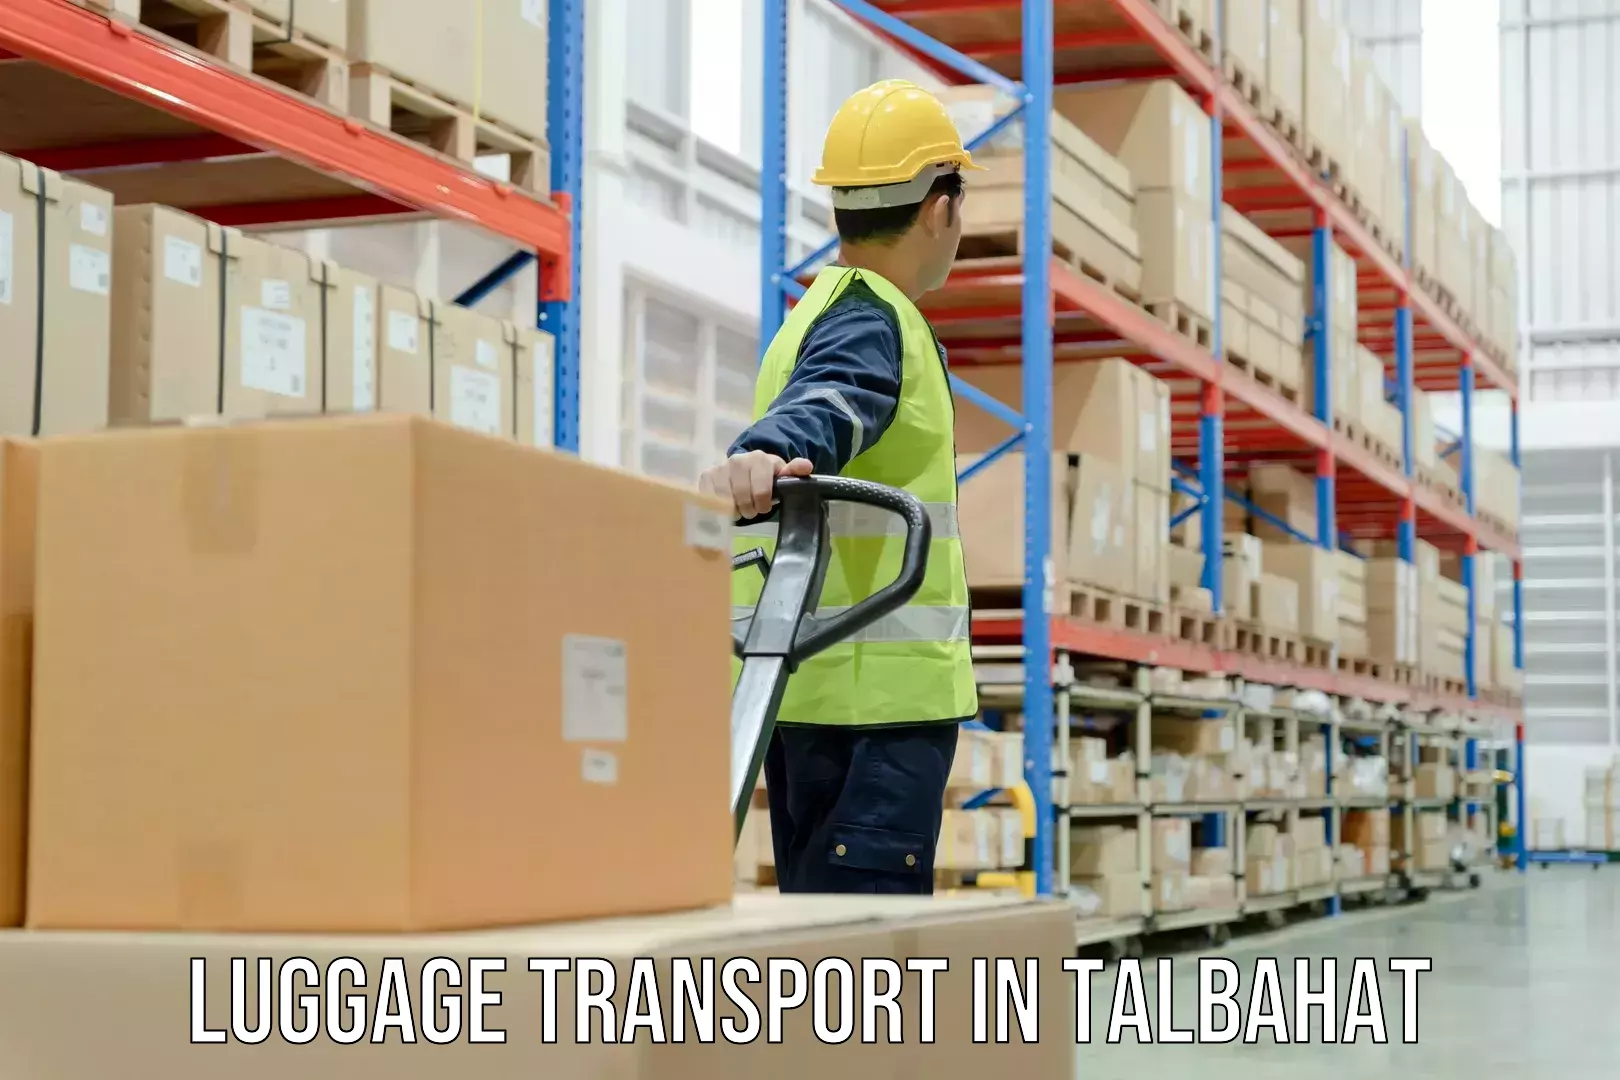 Heavy luggage shipping in Talbahat